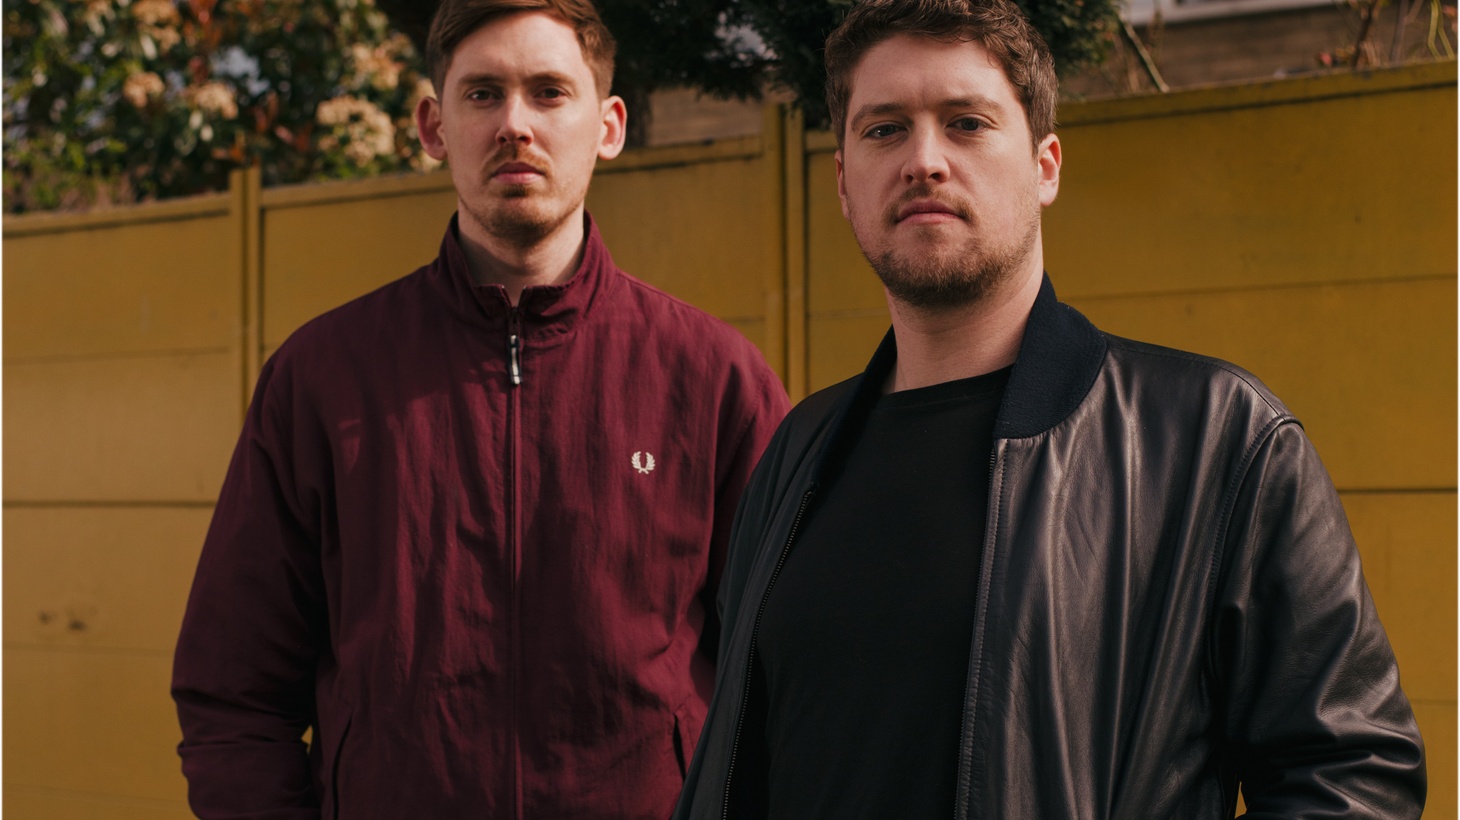 Renowned UK duo Dusky were already known as front runners in electronic music for their distinctive blend of house and bass music when they first arrived on the scene back in 2012, and they’ve maintained their status ever since.